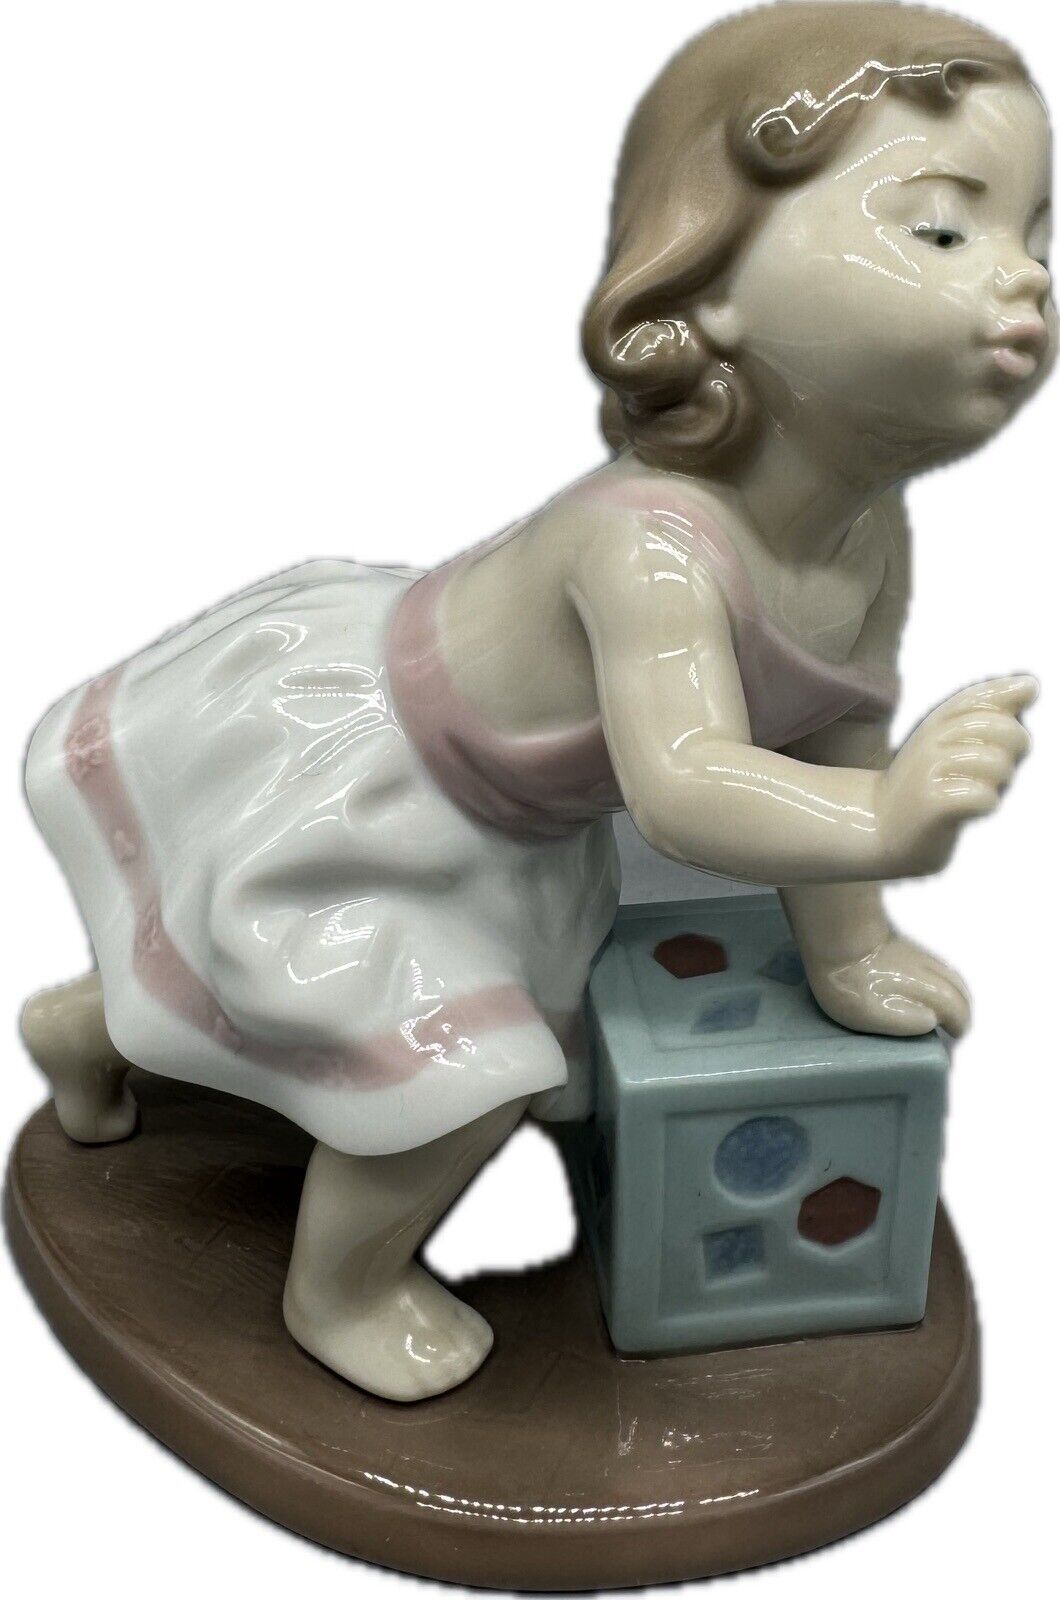 LLADRO 6428 MY FIRST STEP GIRL BLOCK FIGURINE MADE IN SPAIN - RETIRED